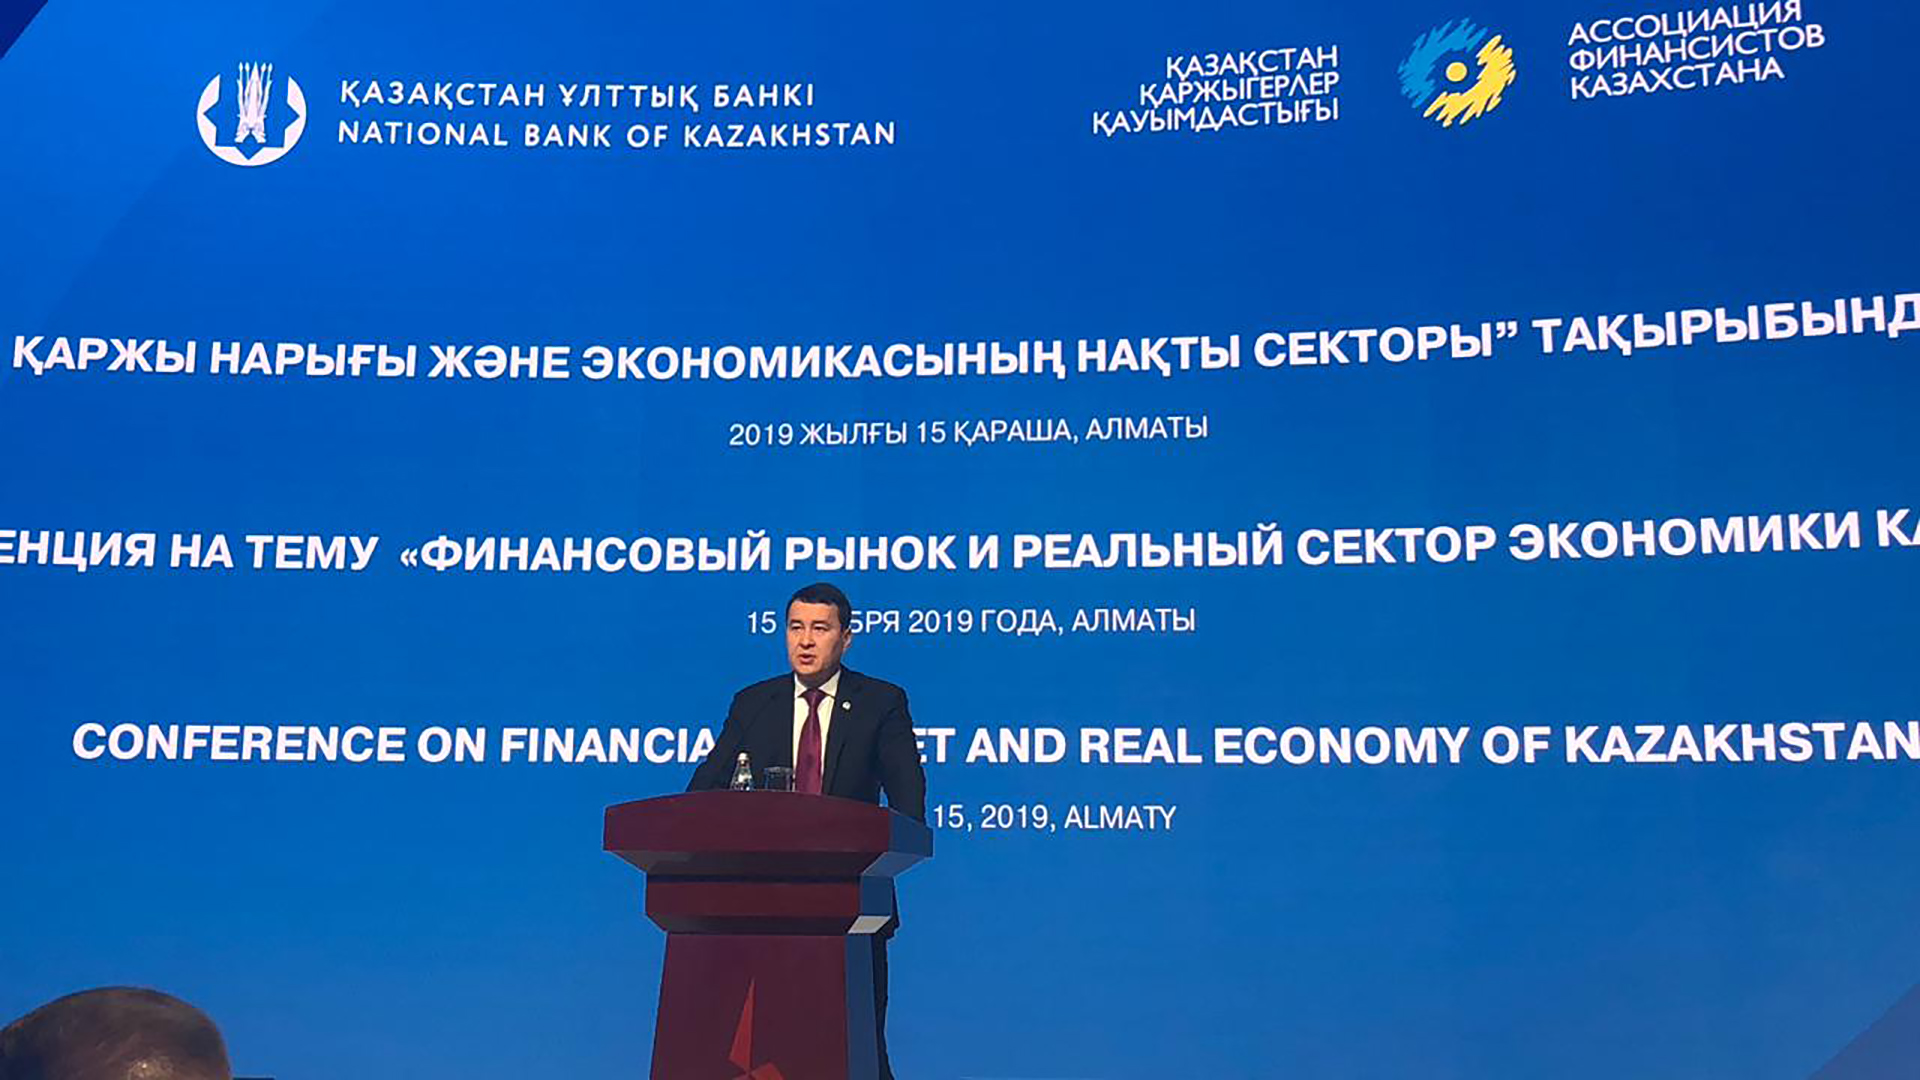 Almaty hosts conference on Financial Market and Real Economy